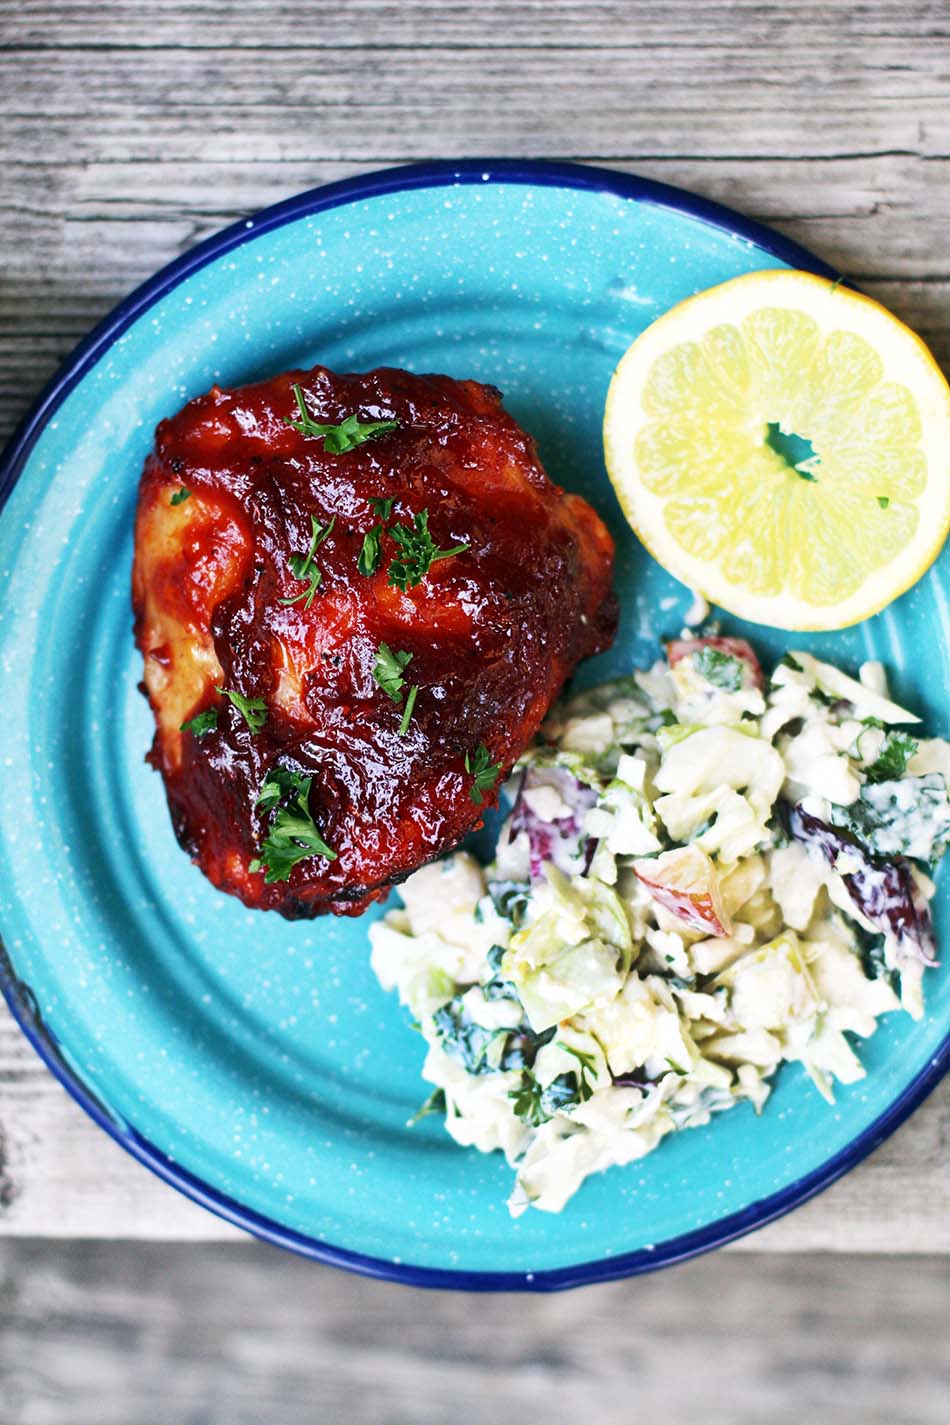 Baked BBQ chicken: Learn how to make the best BBQ chicken thighs at home.